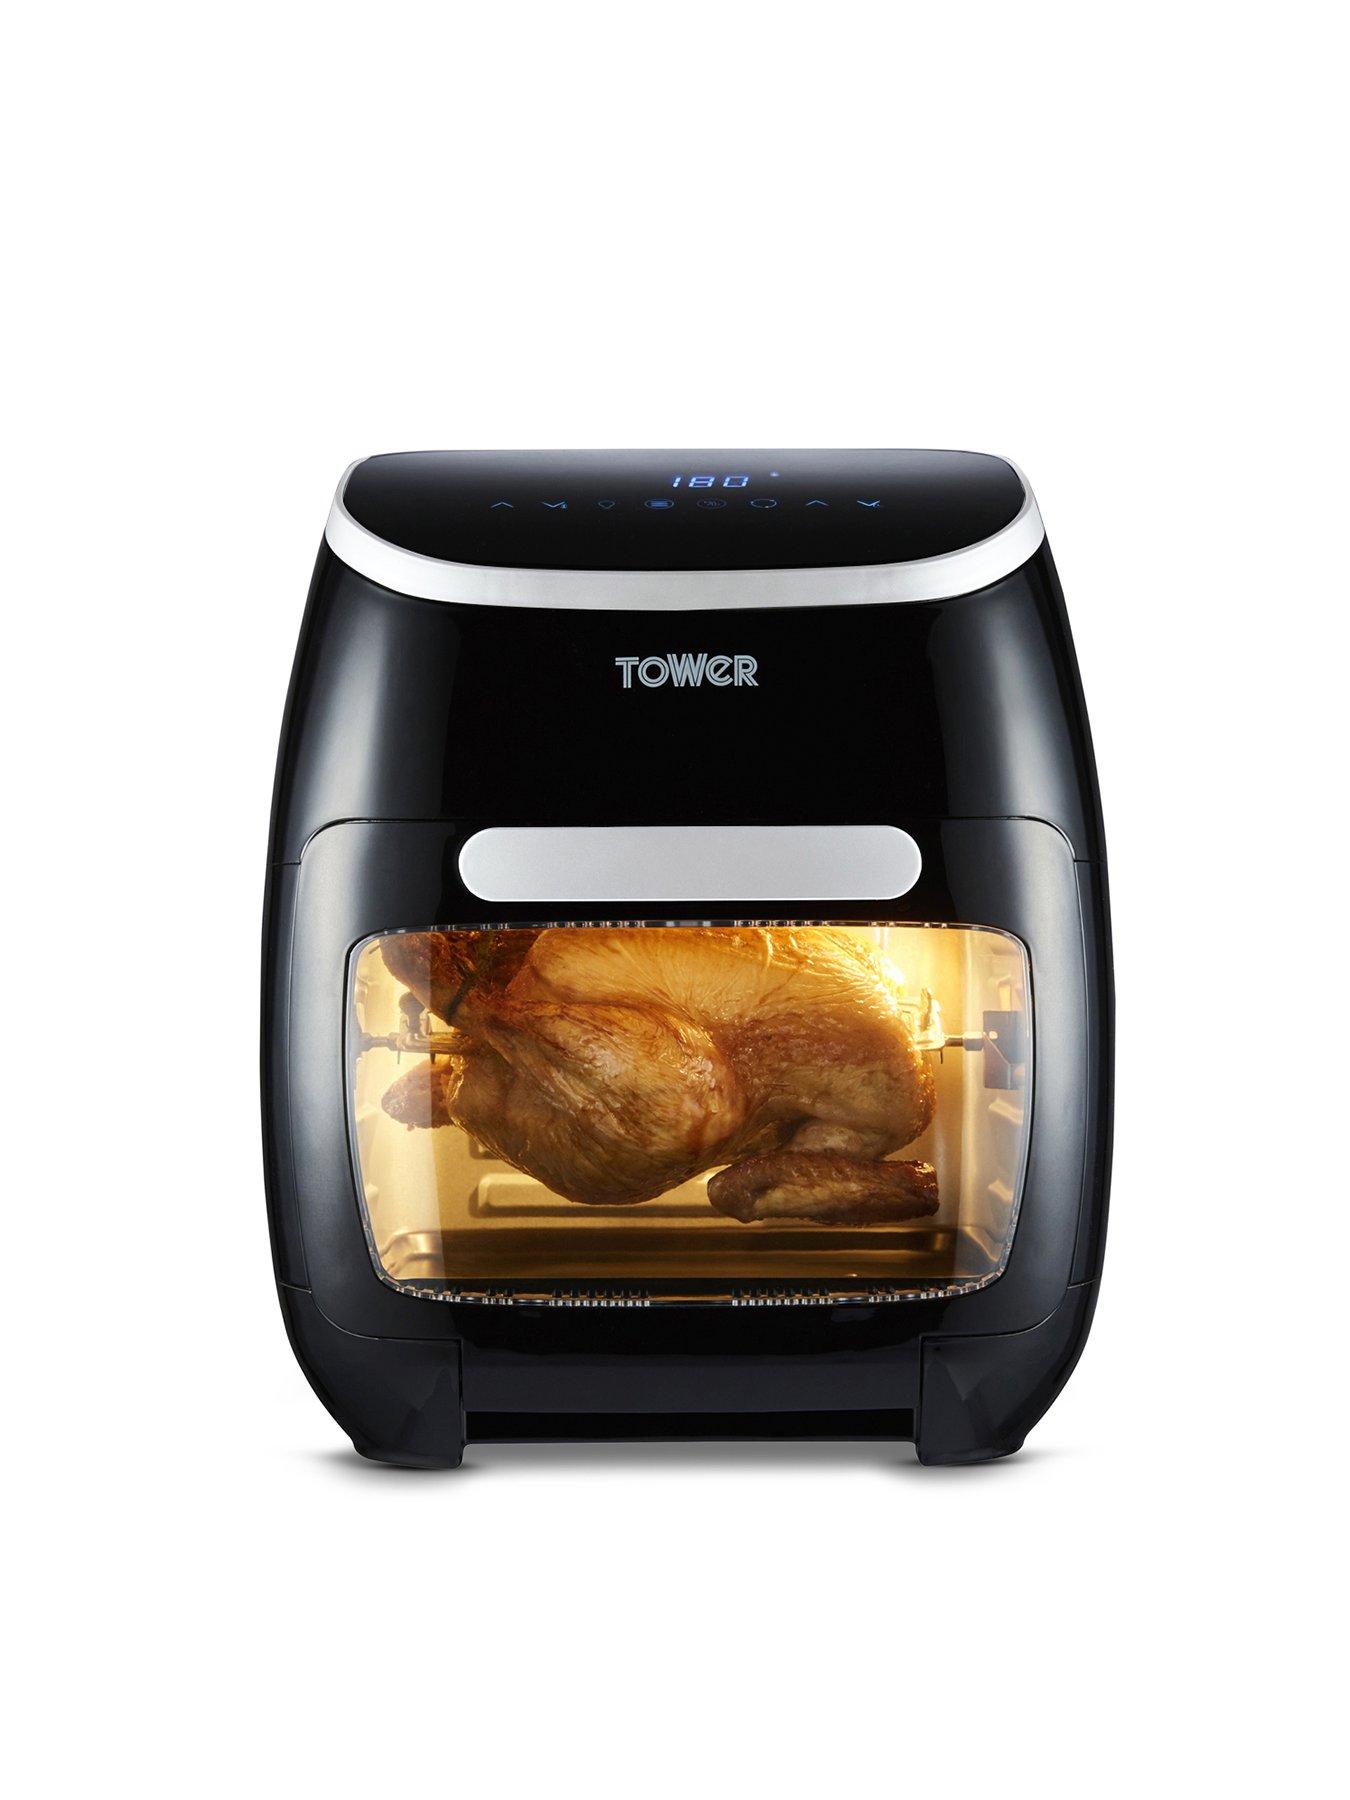 7-in-1 Program 3.5L Air Fryer LCD Digital Display Timer and Fully Adjustable Temperature Control for Healthy Oil Free or Low Fat Cooking with Non Stick Fry Basket 1500W Oil Free Air Fryer 